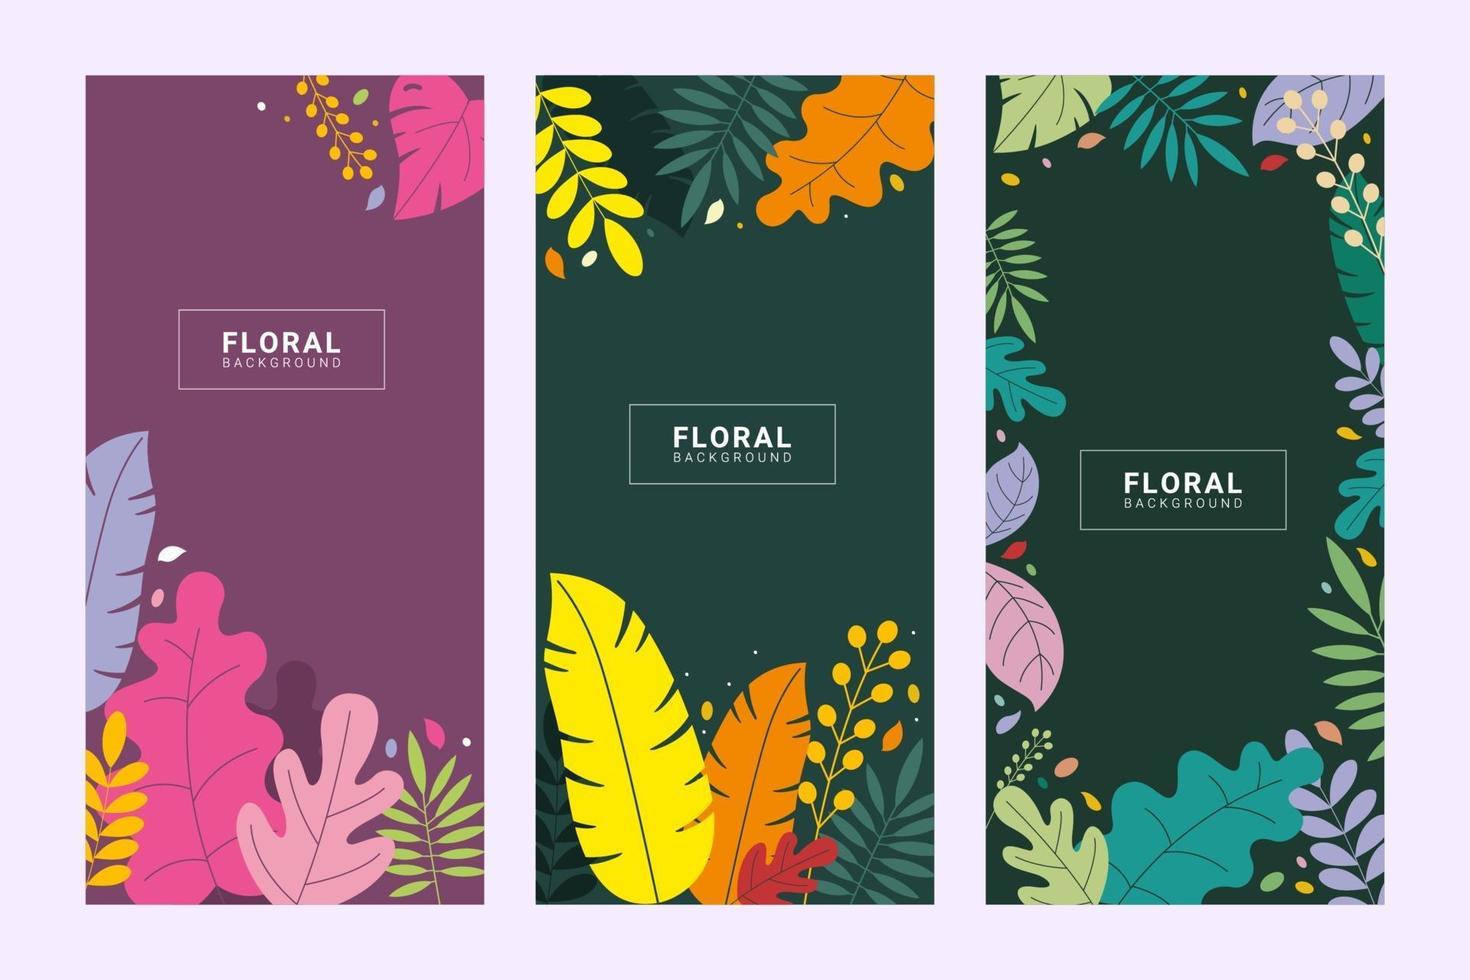 Floral background with gradient colors vector